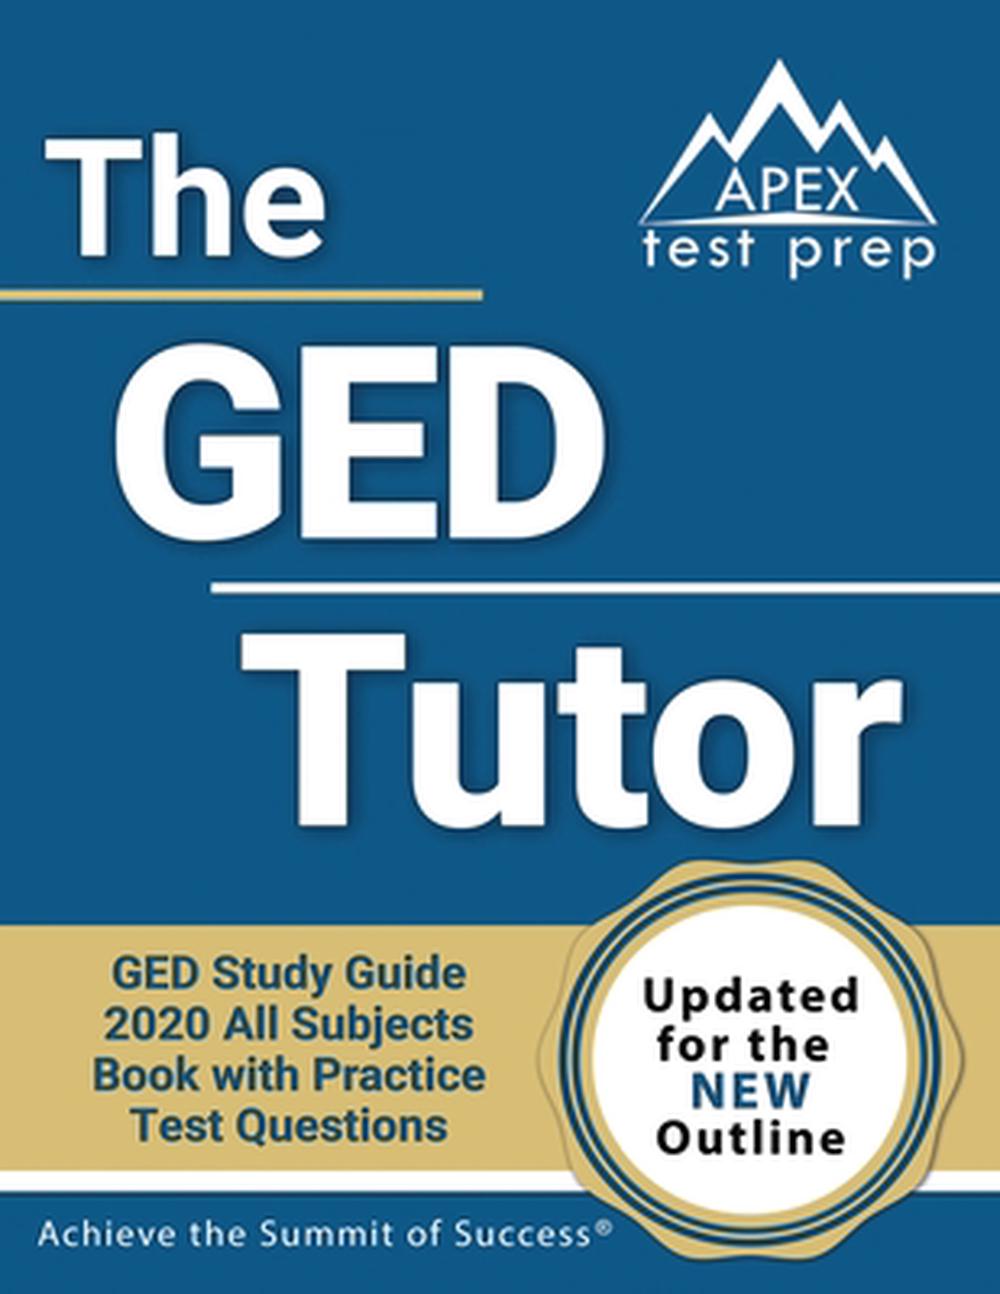 Ged Tutor Book GED Study Guide 2020 All Subjects with Practice Test